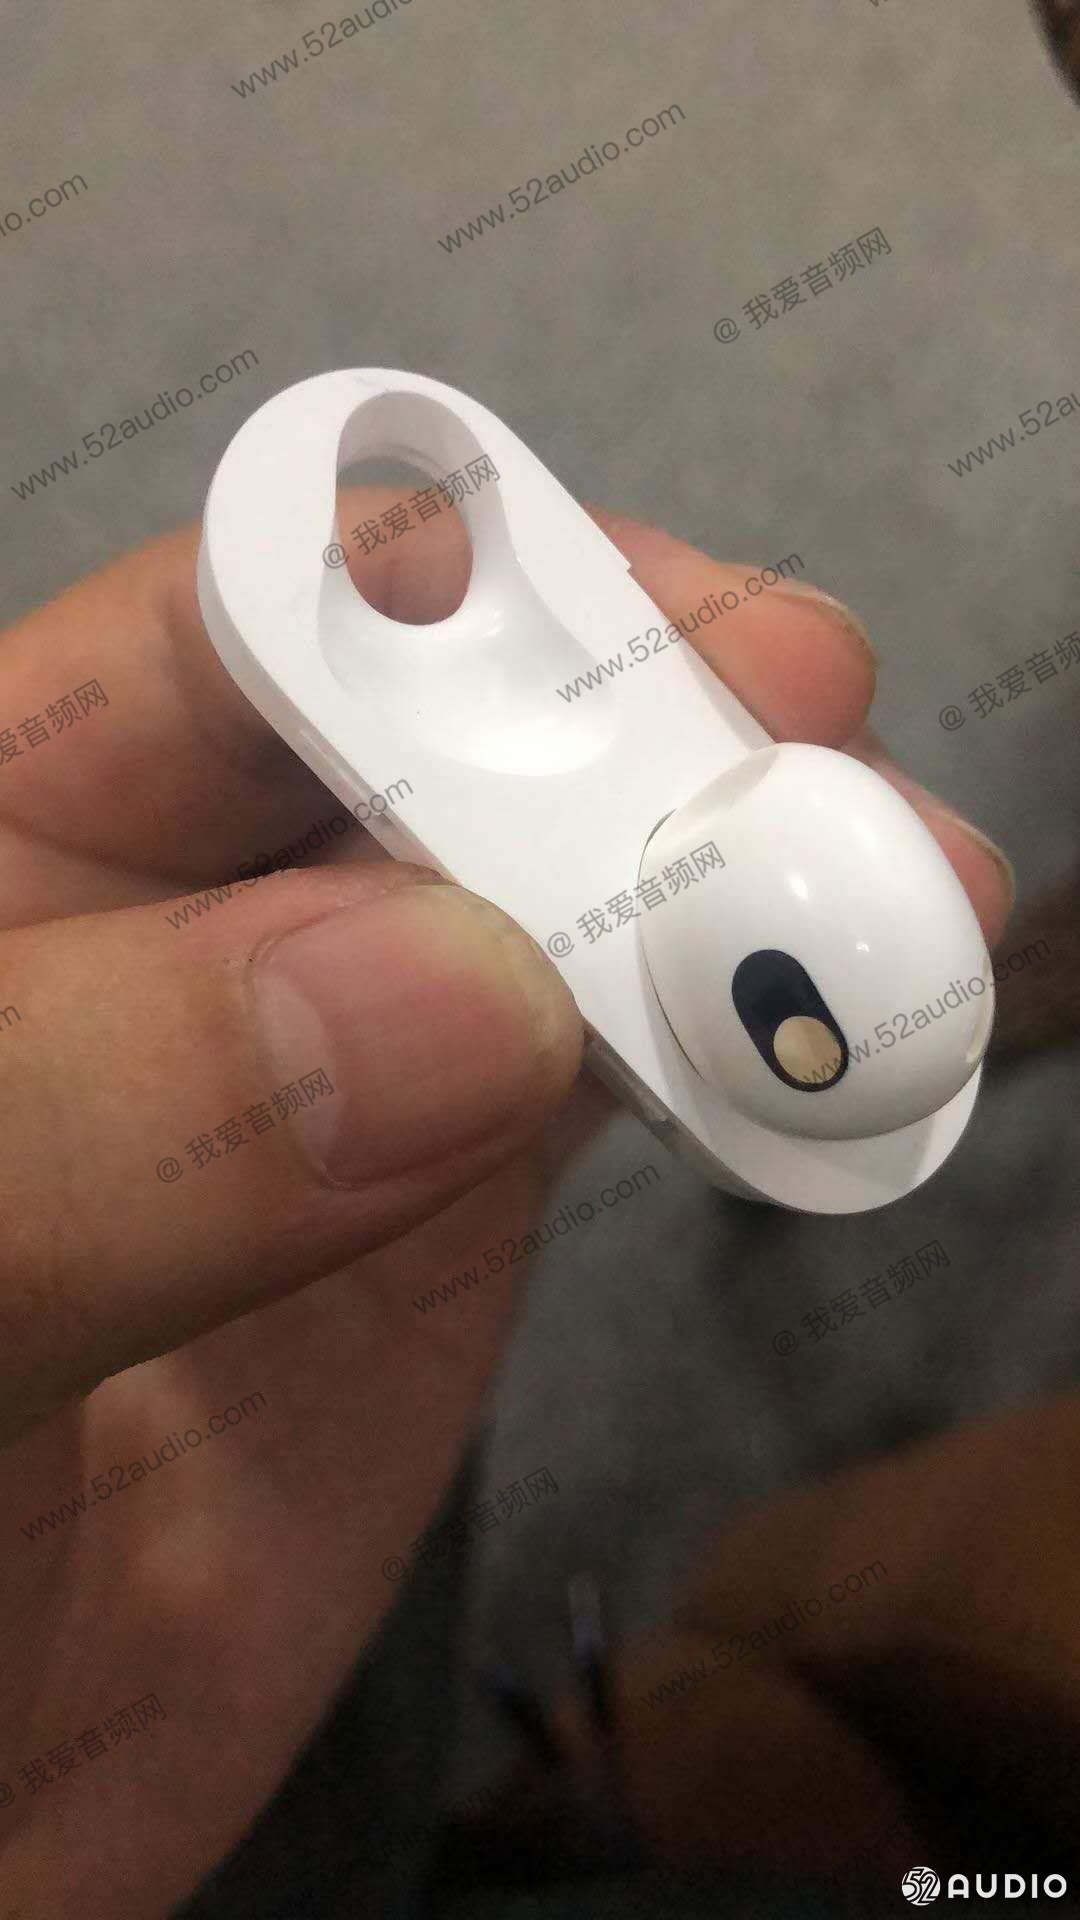 ｢AirPods (第3世代)｣のレンダリング画像や部品写真が登場 − 正式名称は｢AirPods Small｣に??